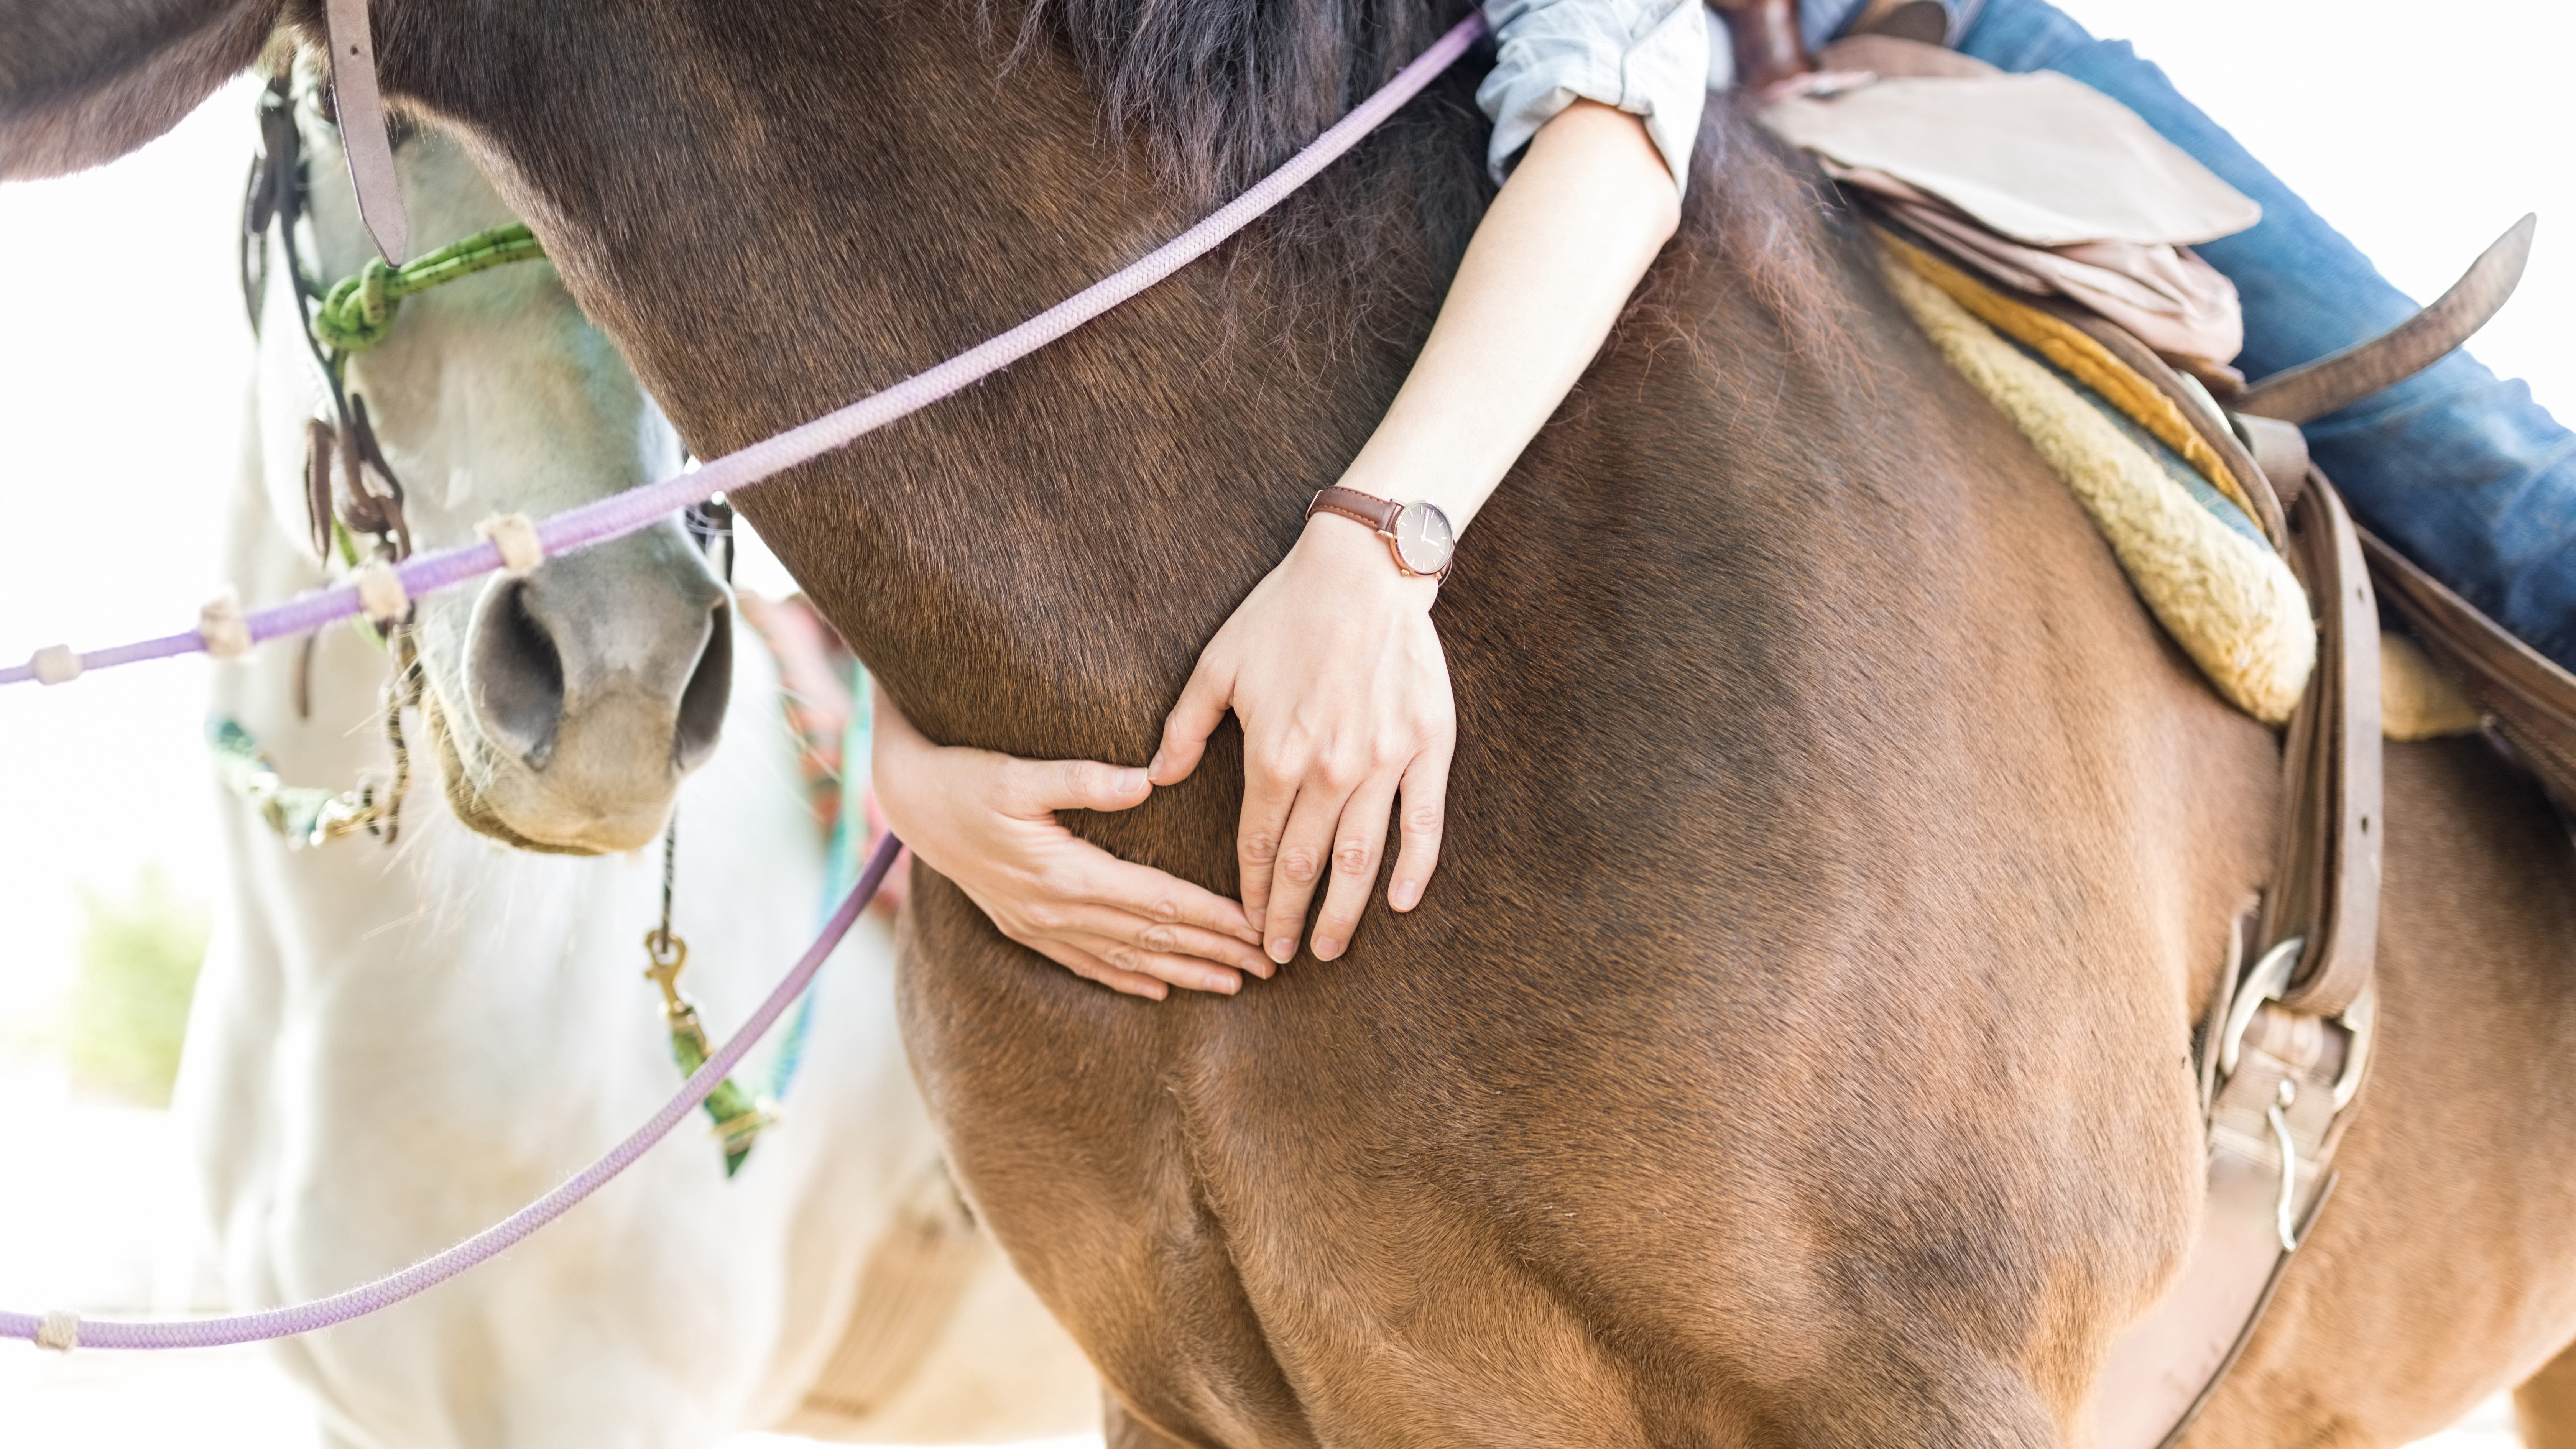 HeartMath studies show a horse's heart has a large energy field that improves health and wellbeing in humans.